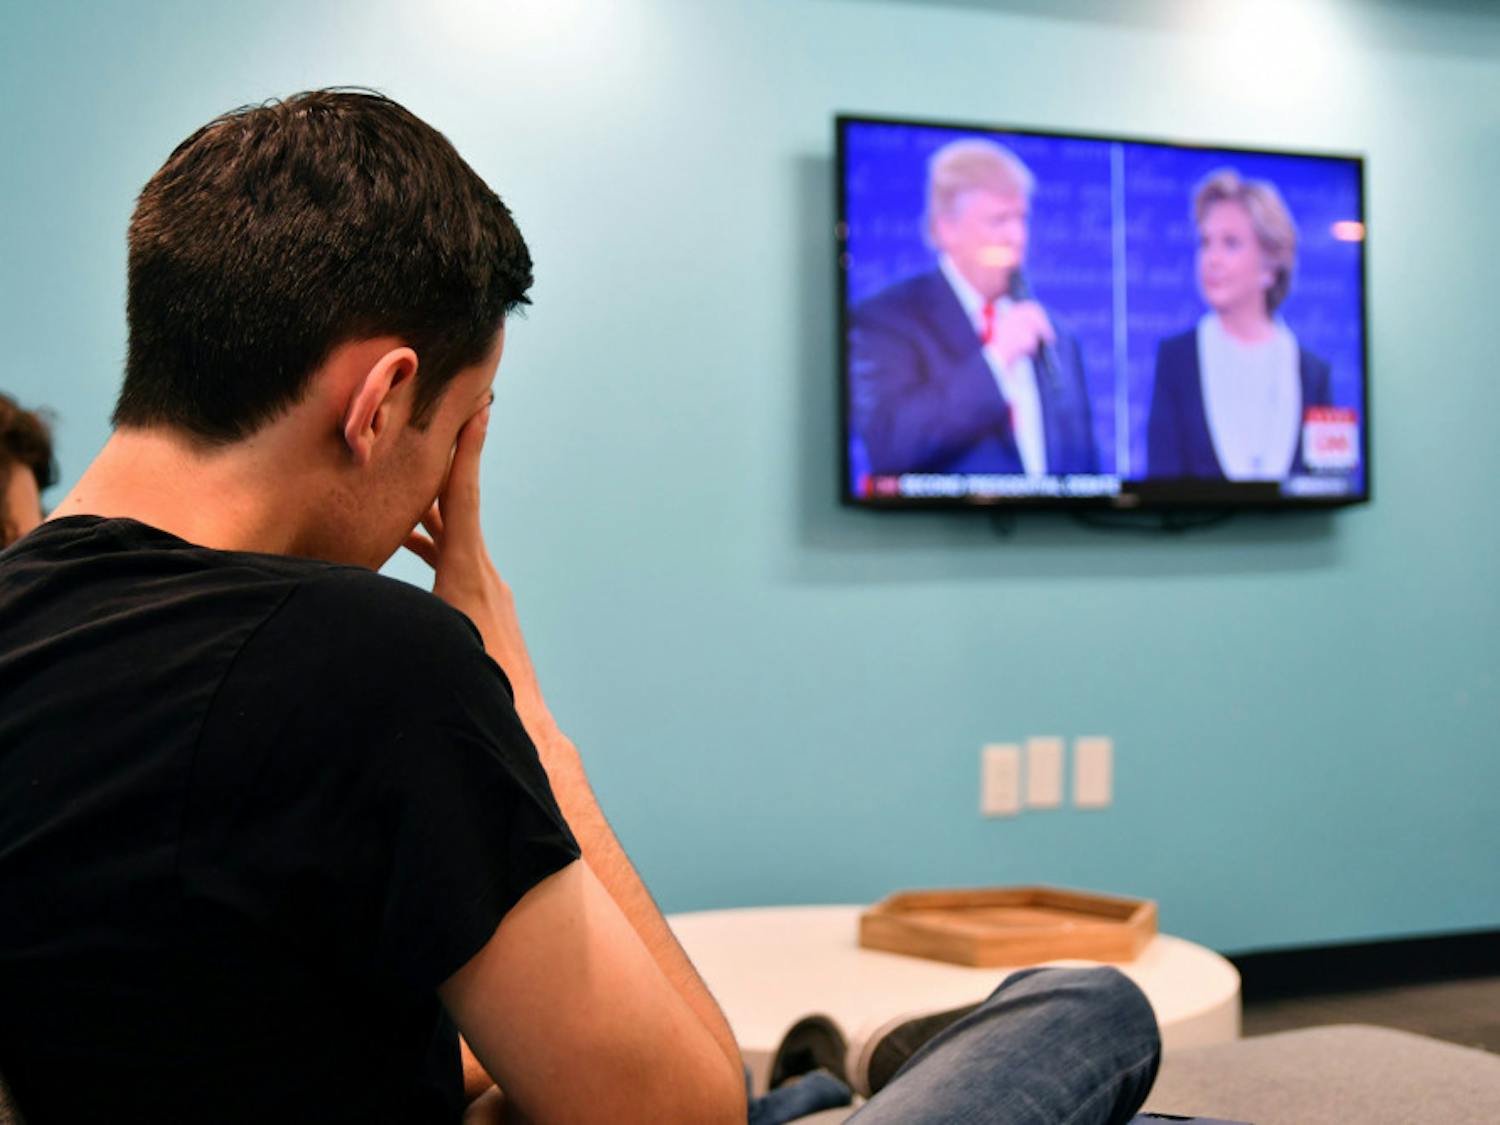 Daniel Hopin, a 20-year-old UF public relations junior, covers his face as he watches the two candidates banter back and forth during the UF College Republicans’ watch party on Sunday evening at Social 28’s south building, located at 311 SW 13th St.